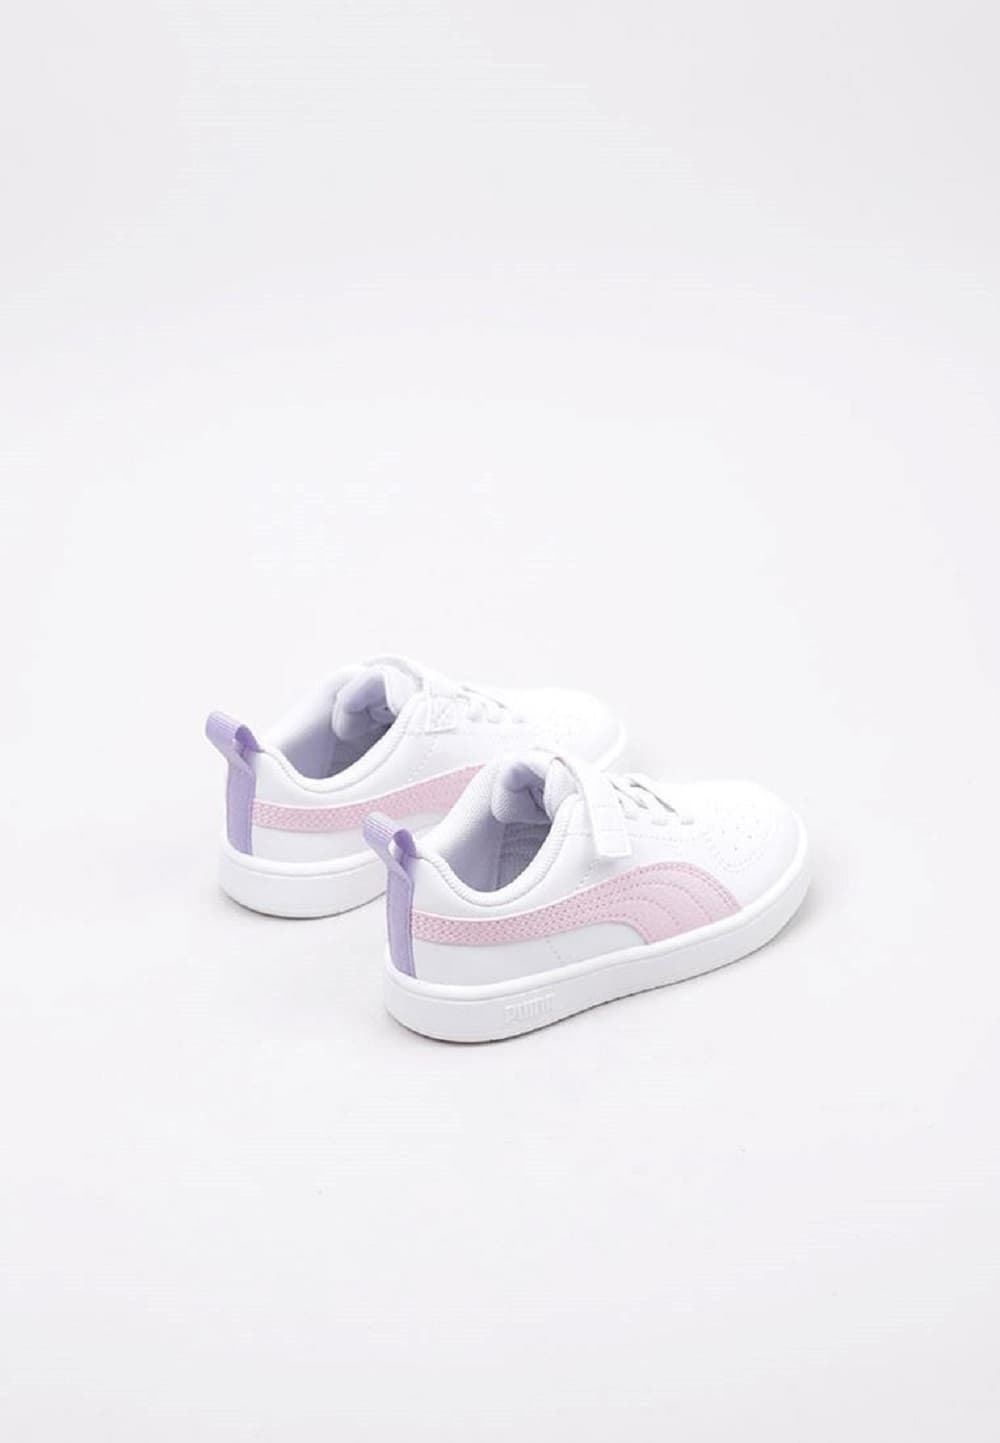 Puma Rickie White-Pink Sneakers with Velcro - Image 3